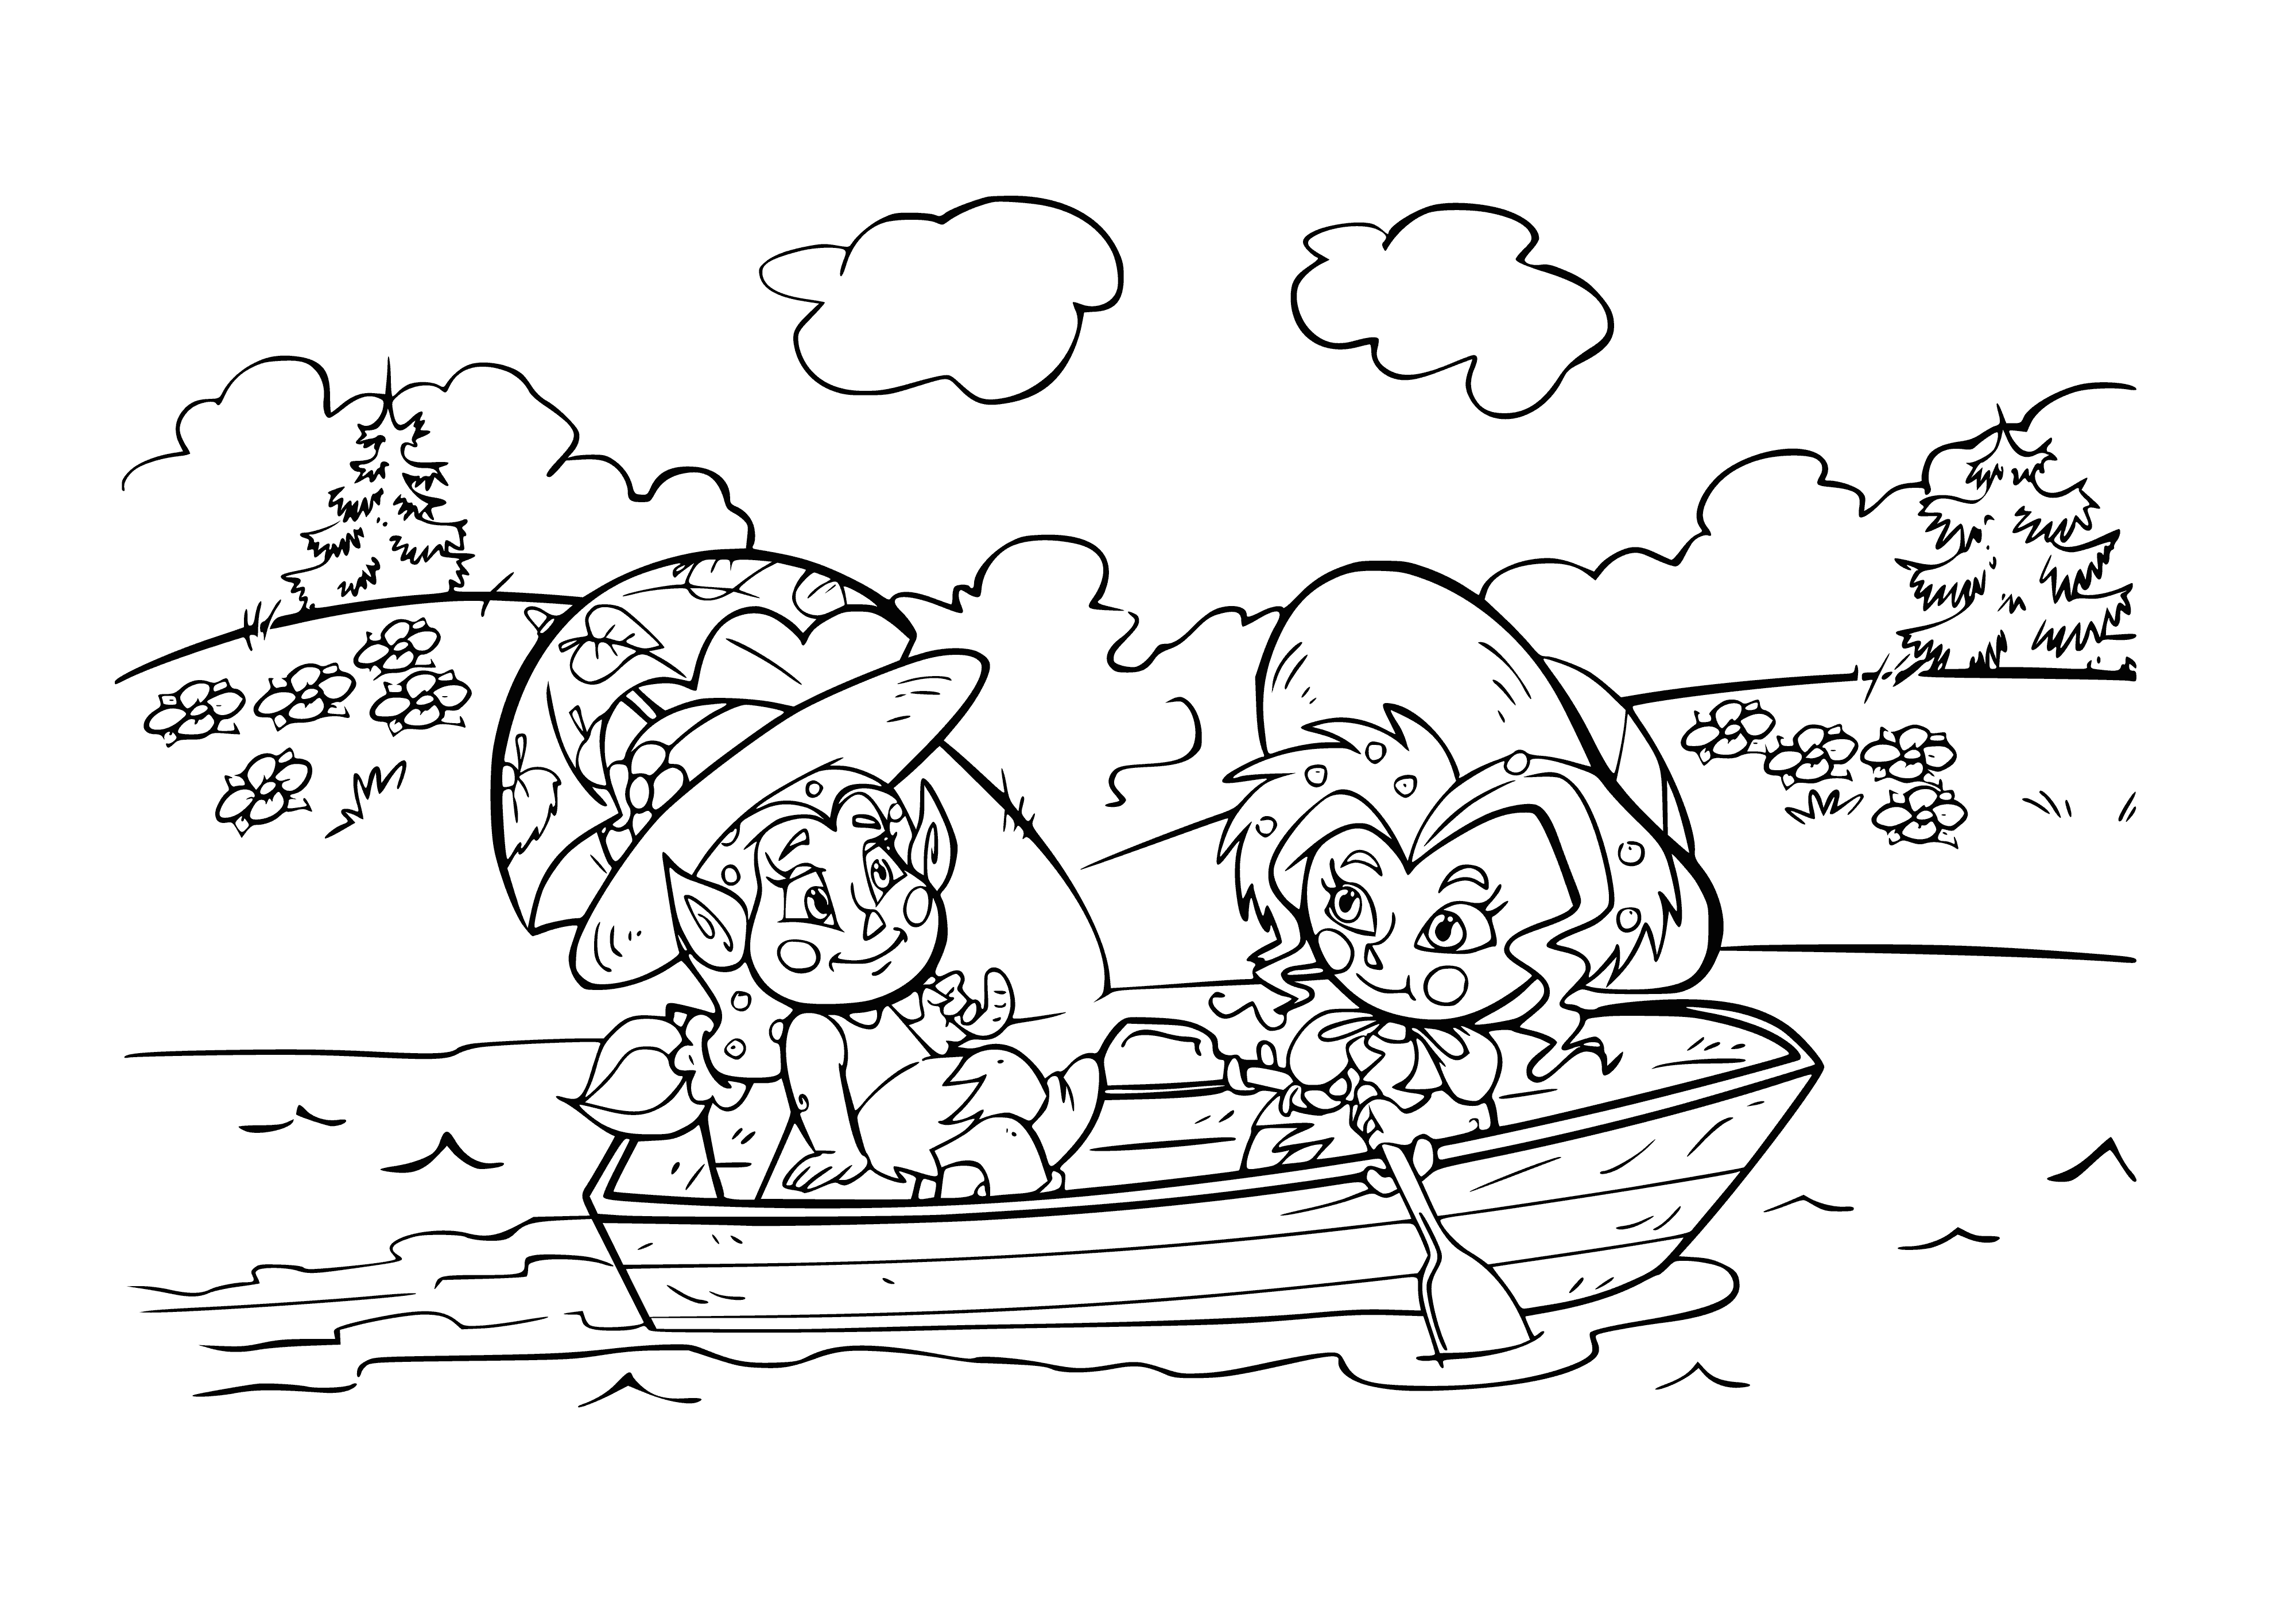 coloring page: Two best friends, Duckweed and Zelenka, always cause trouble and find their way out in the animated series Leshiki.